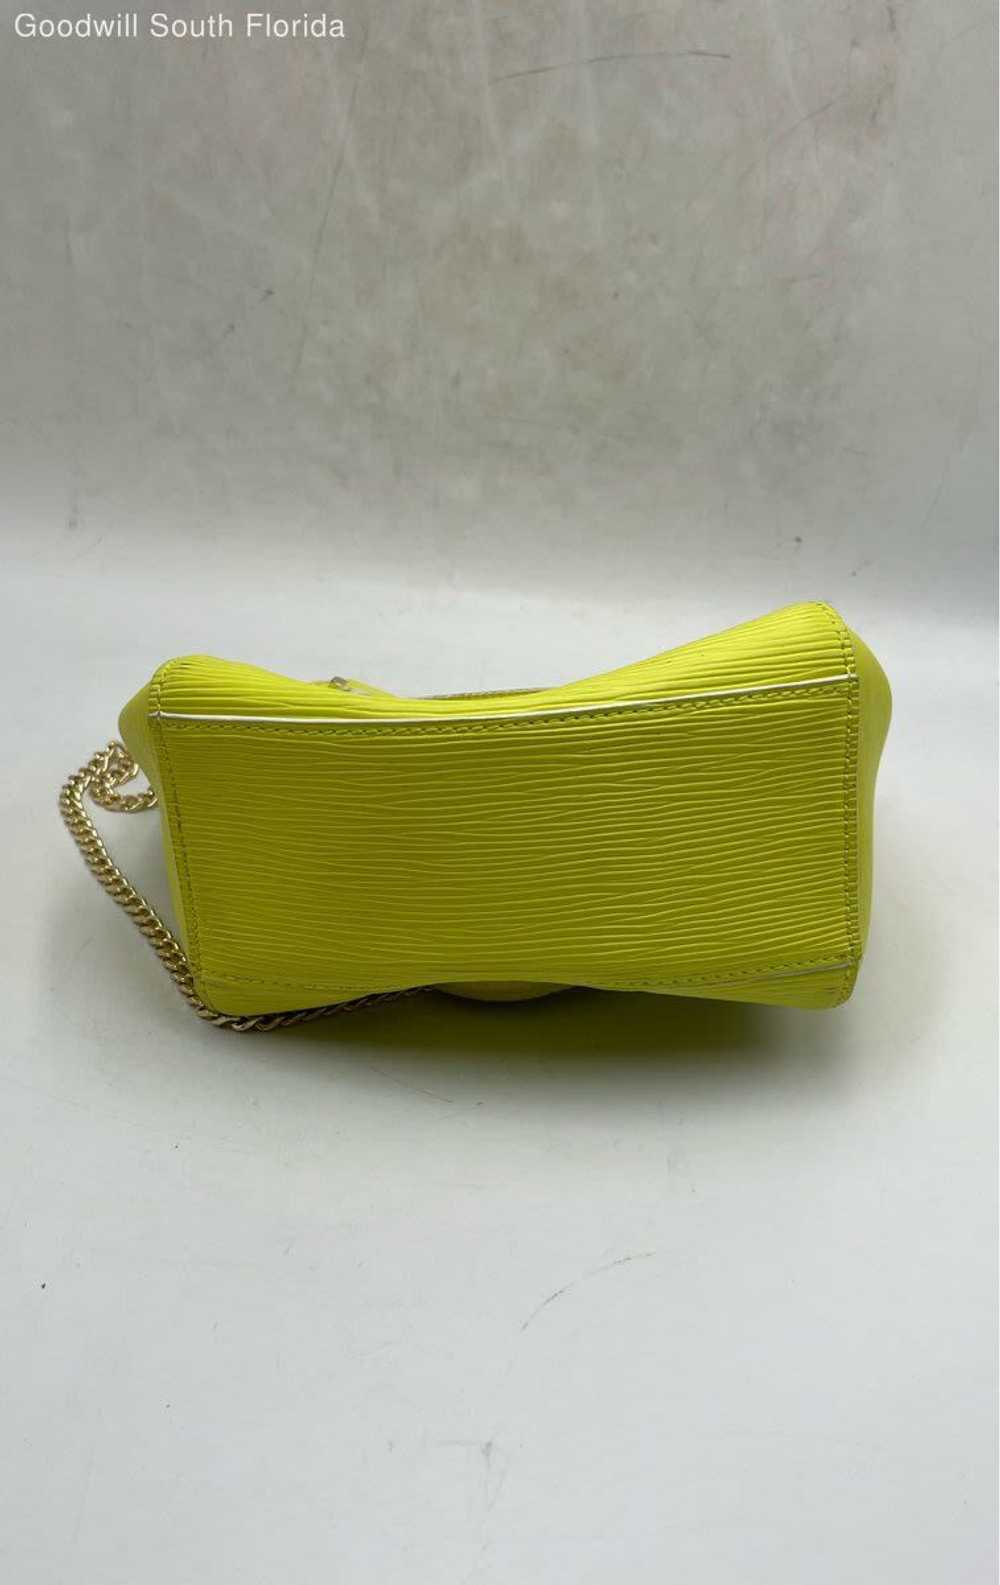 Ted Baker London Bright Yellow Purse - image 4